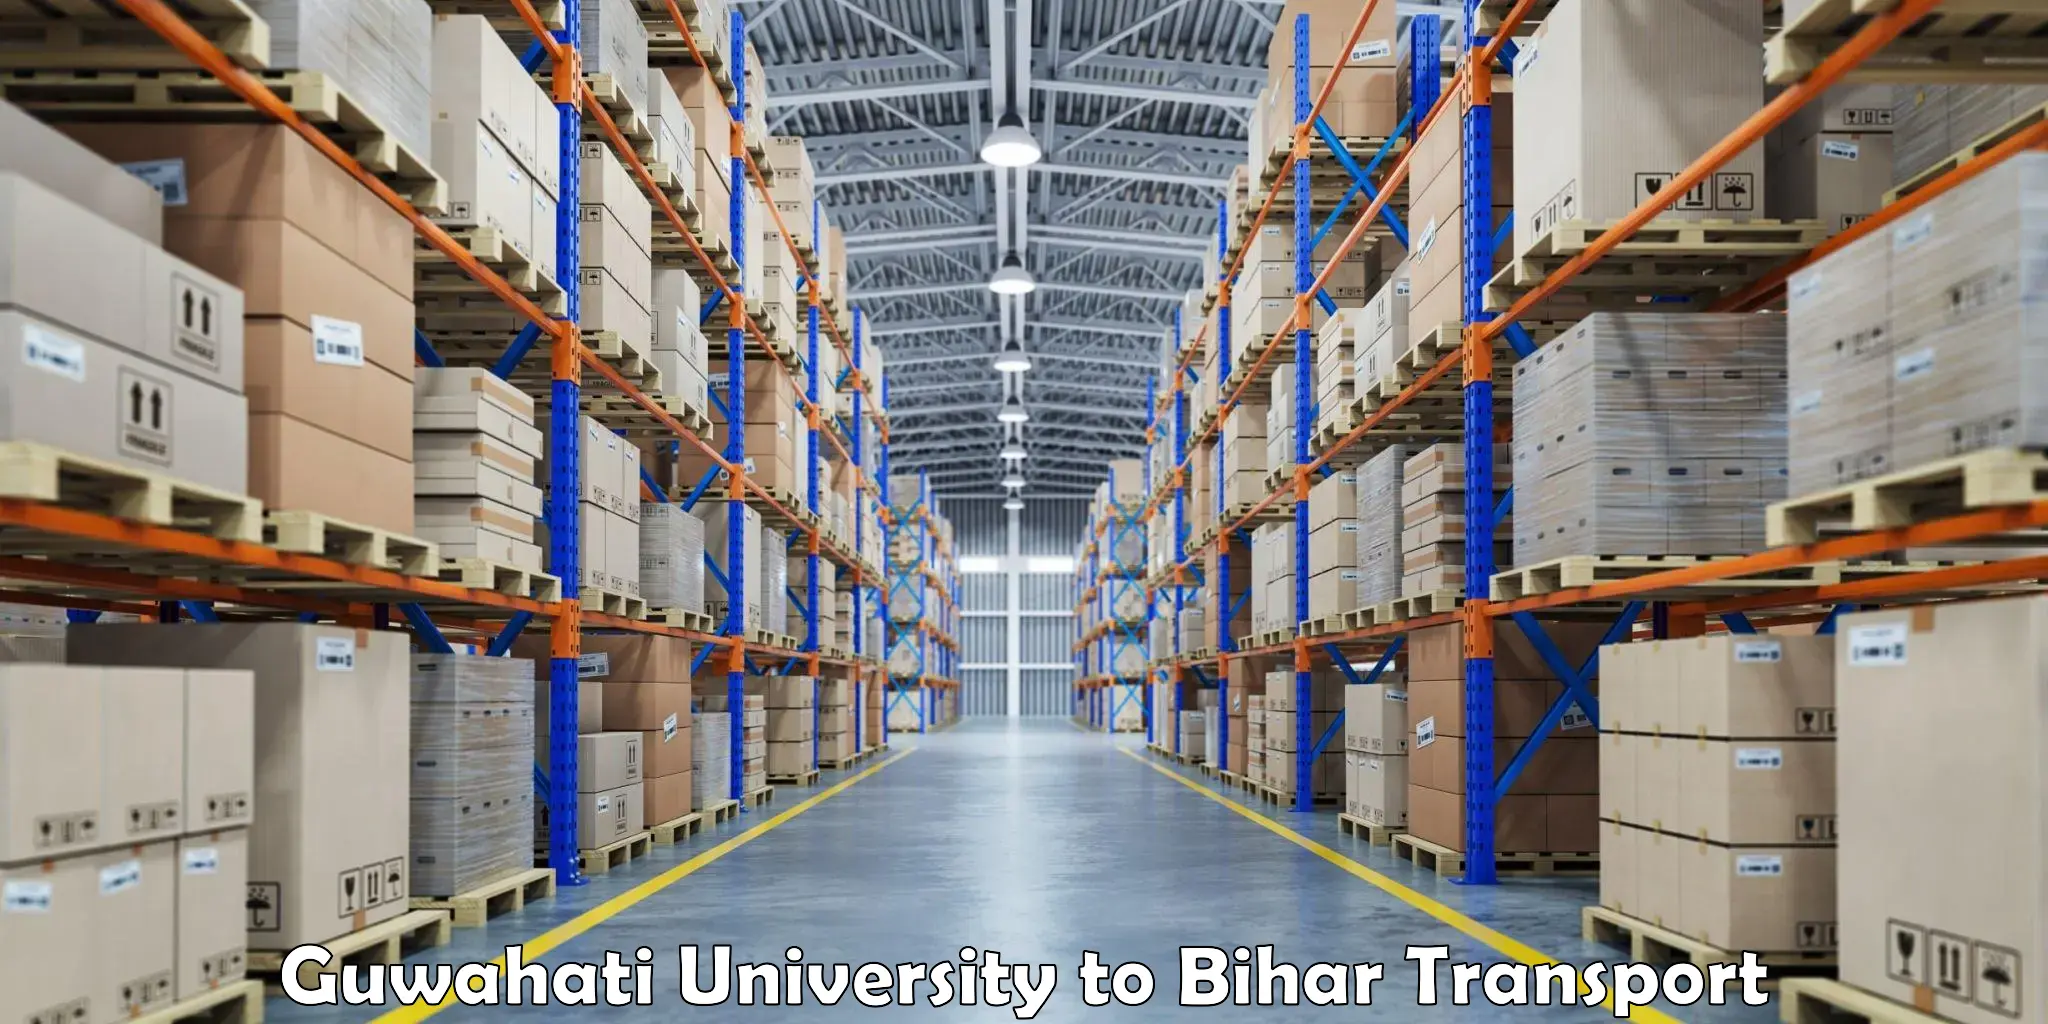 Container transport service Guwahati University to Chainpur